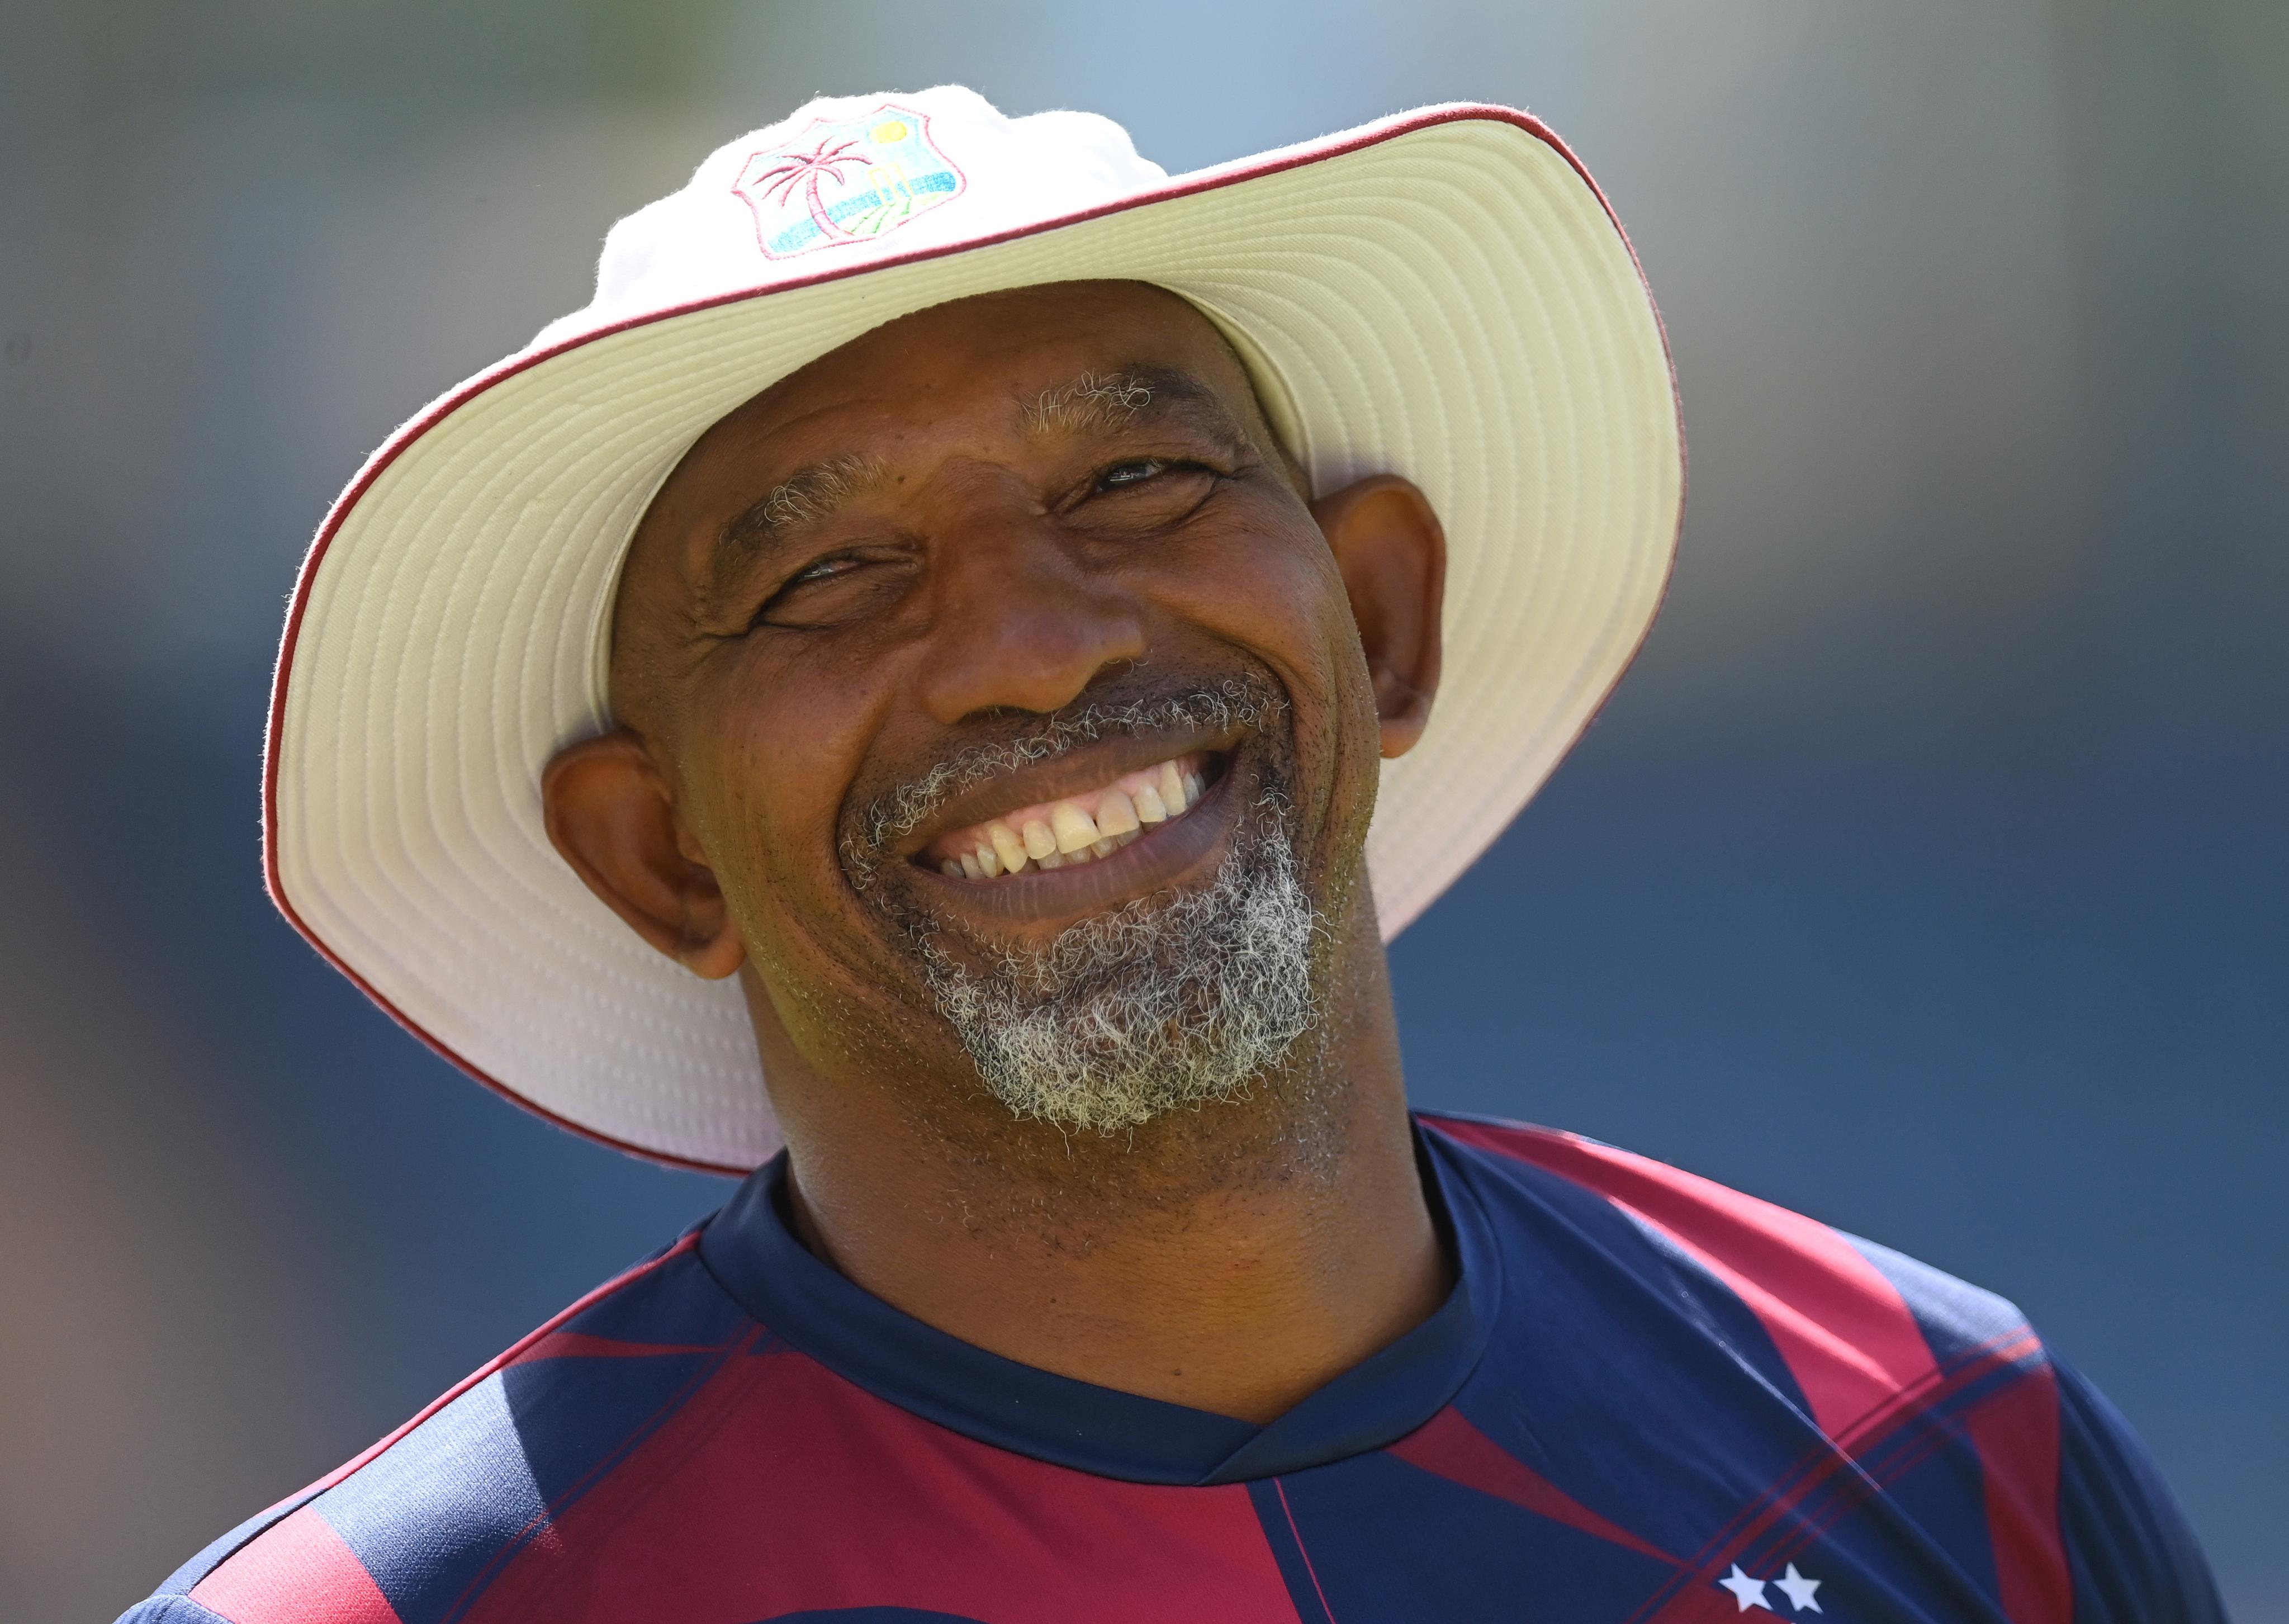 ICC World T20 | Phil Simmons steps down as West Indies head coach after team’s exit in first round